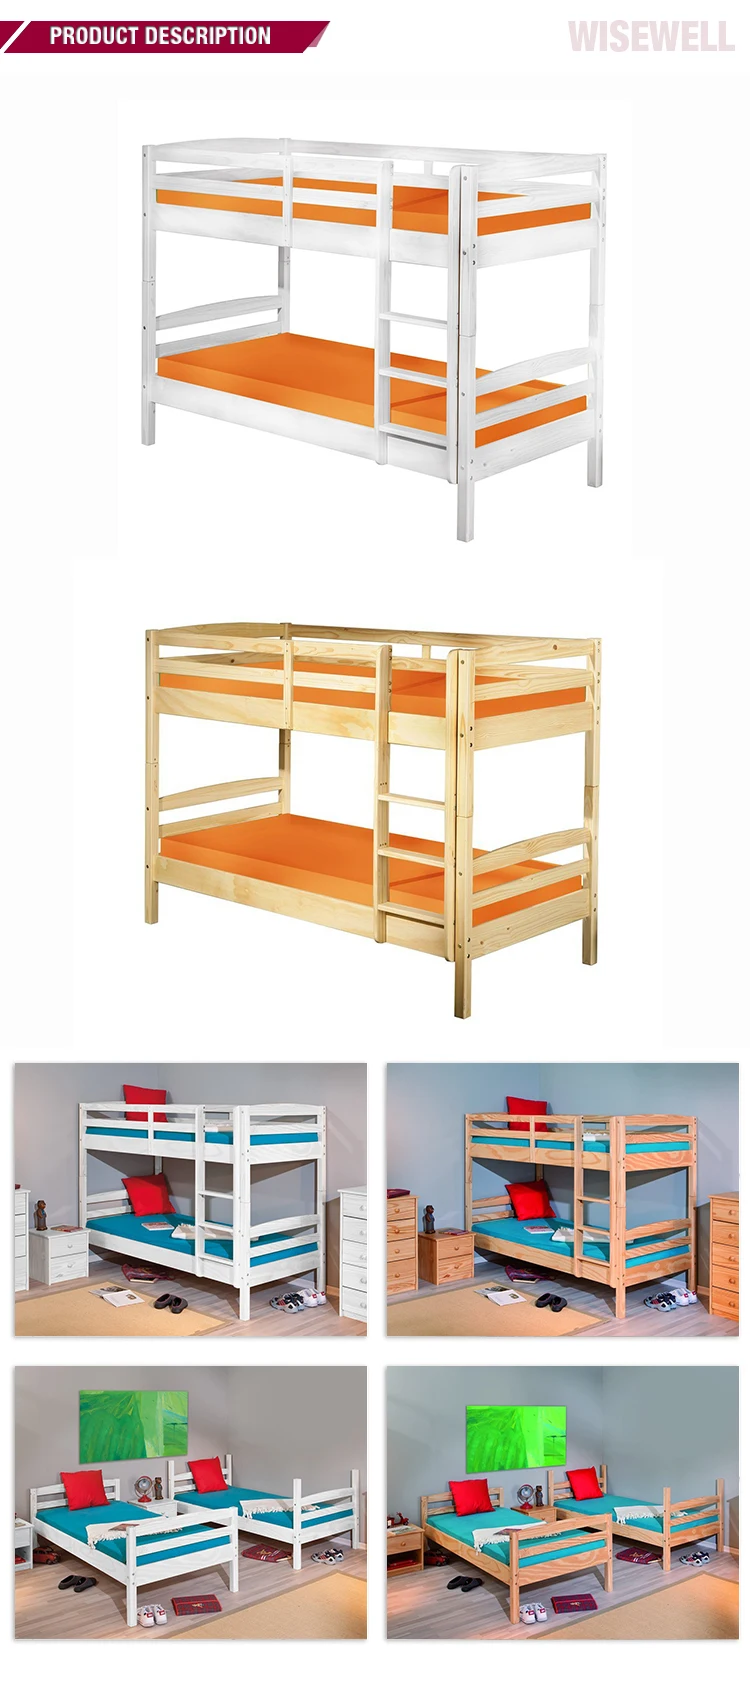 W-B-3530 wood double  frame designs bunk beds